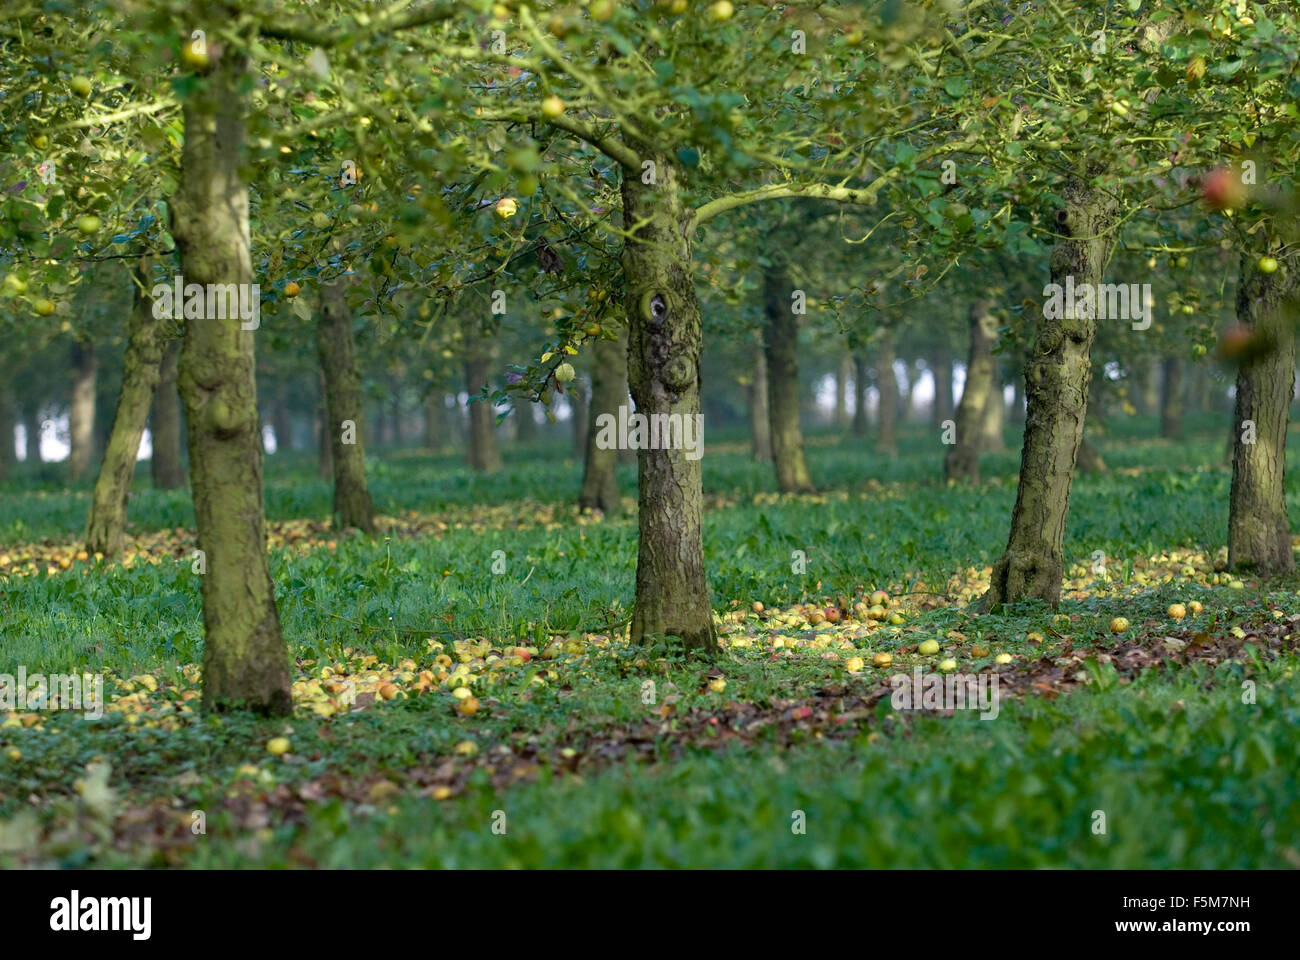 Norman cider making: low apple trees, bush apple trees, low-stemmed apple trees Stock Photo